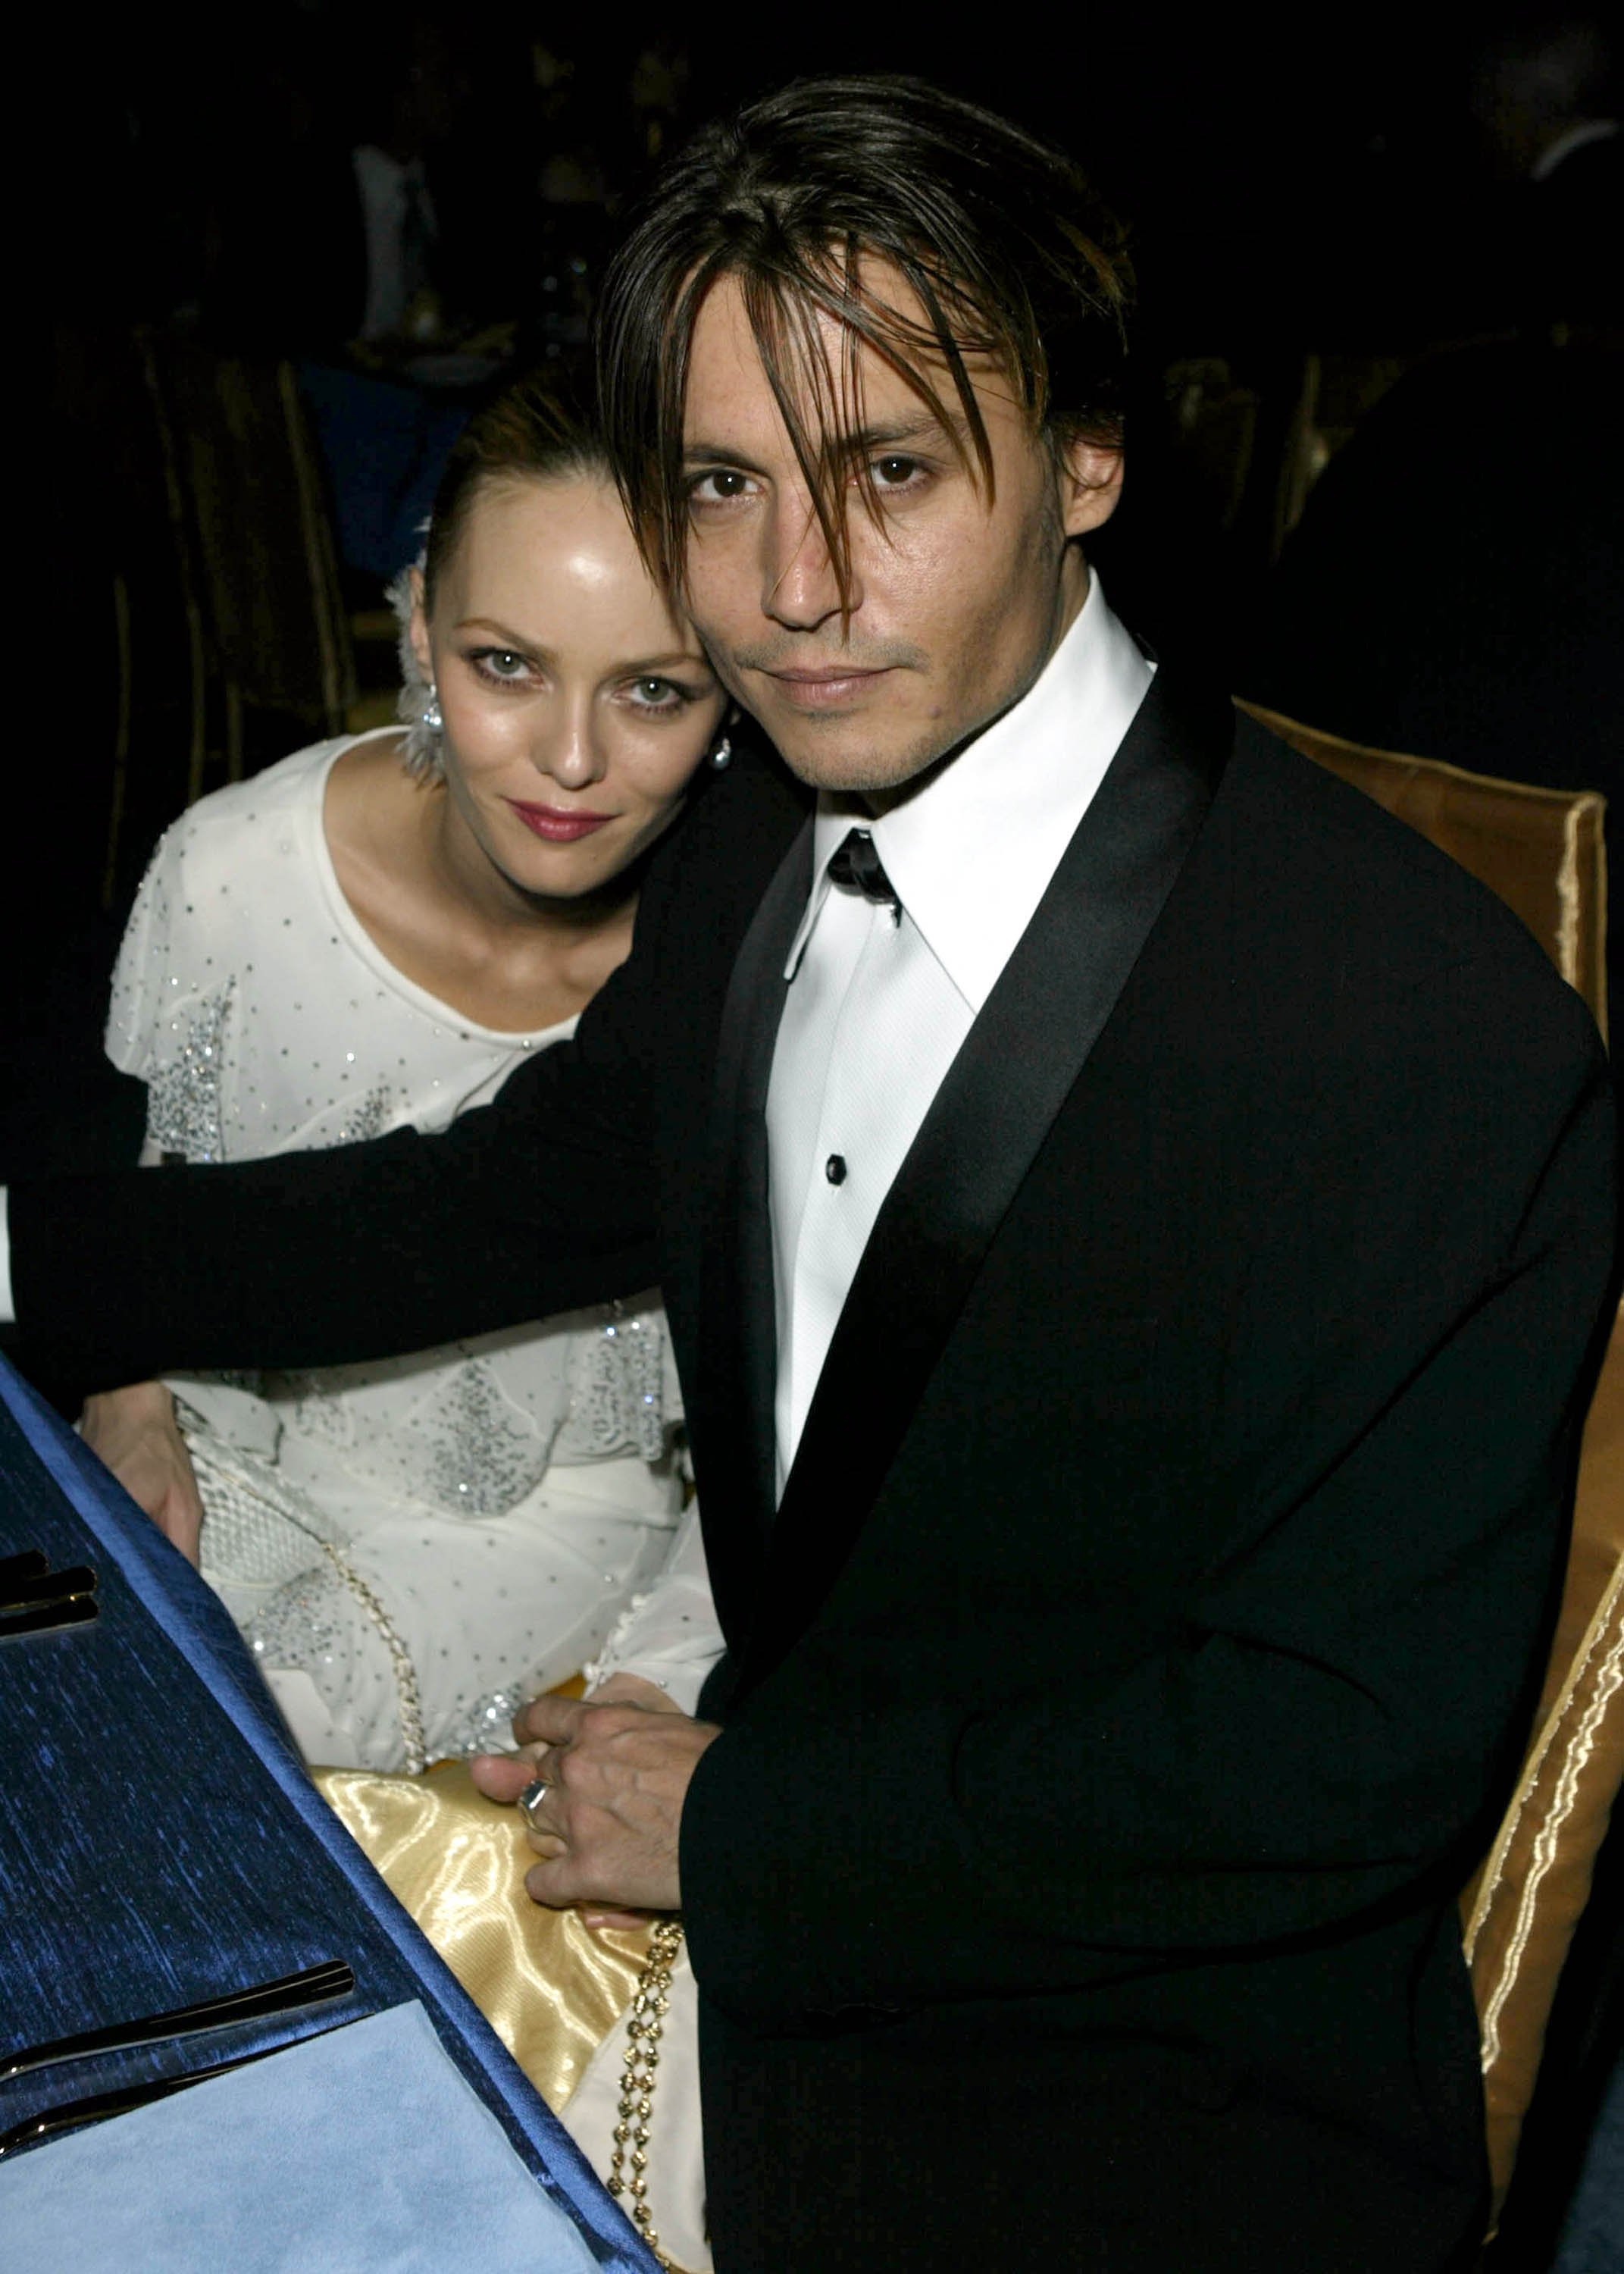 Actress Vanessa Paradis and Johnny Depp at the The Kodak Theater in Hollywood, California. | Source: Getty Images